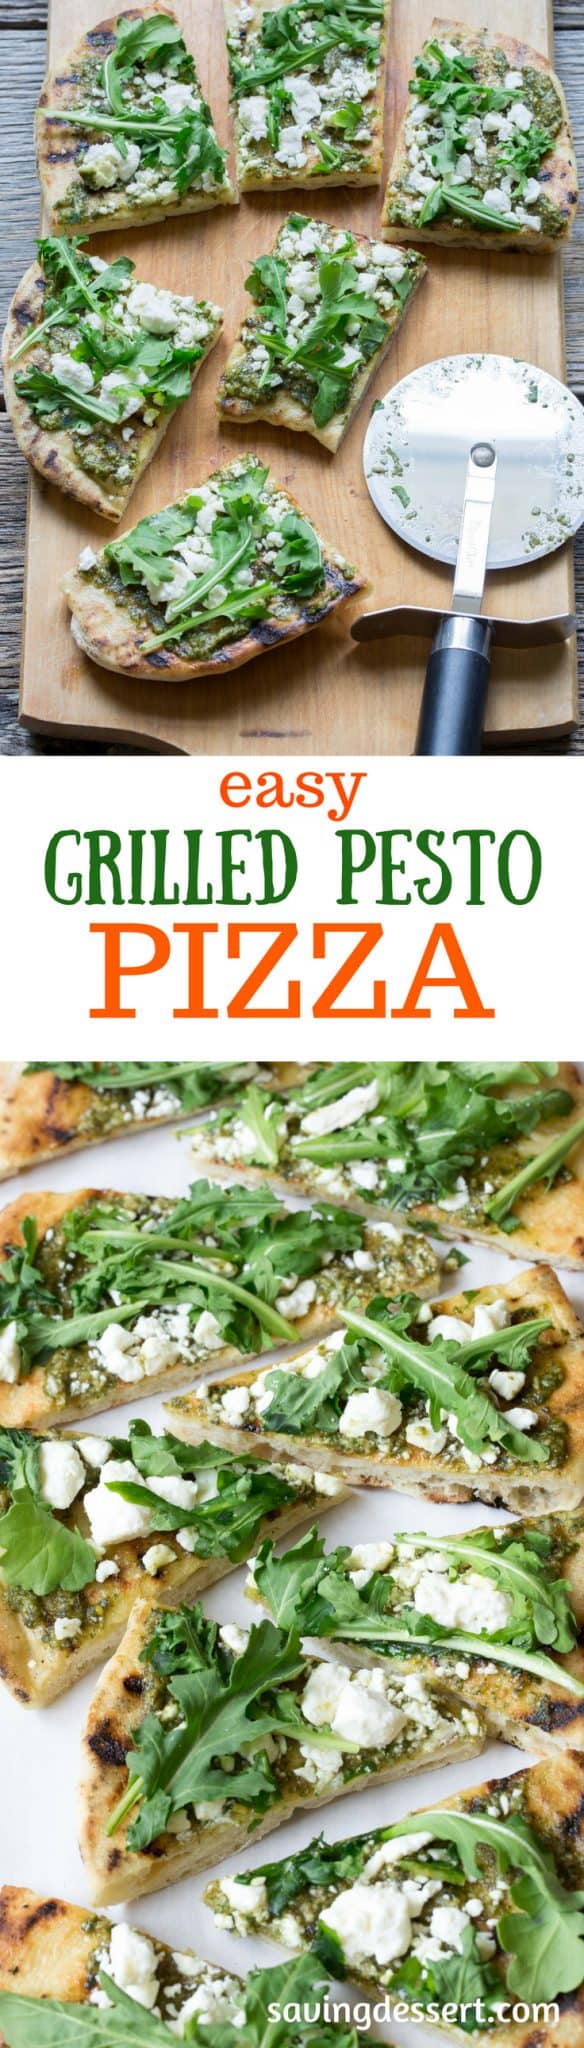 Easy Grilled Pesto Pizza ~A full flavored pizza made with fresh Basil Pesto and peppery arugula. Feta cheese adds a nice creamy bite to this simple but tasty pizza. www.savingdessert.com